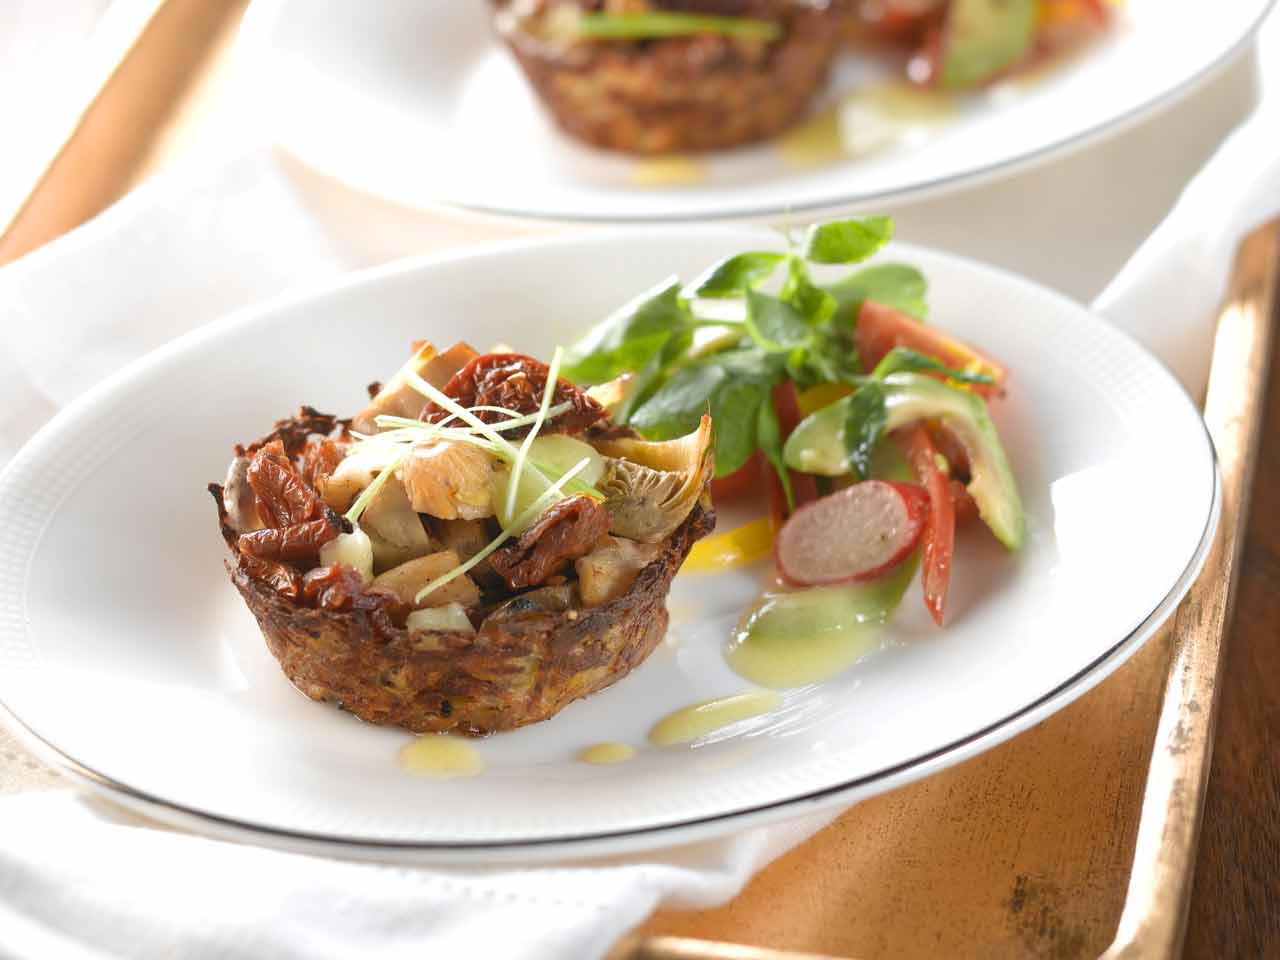 Potato nests with artichokes, oyster mushrooms and sun-dried tomatoes